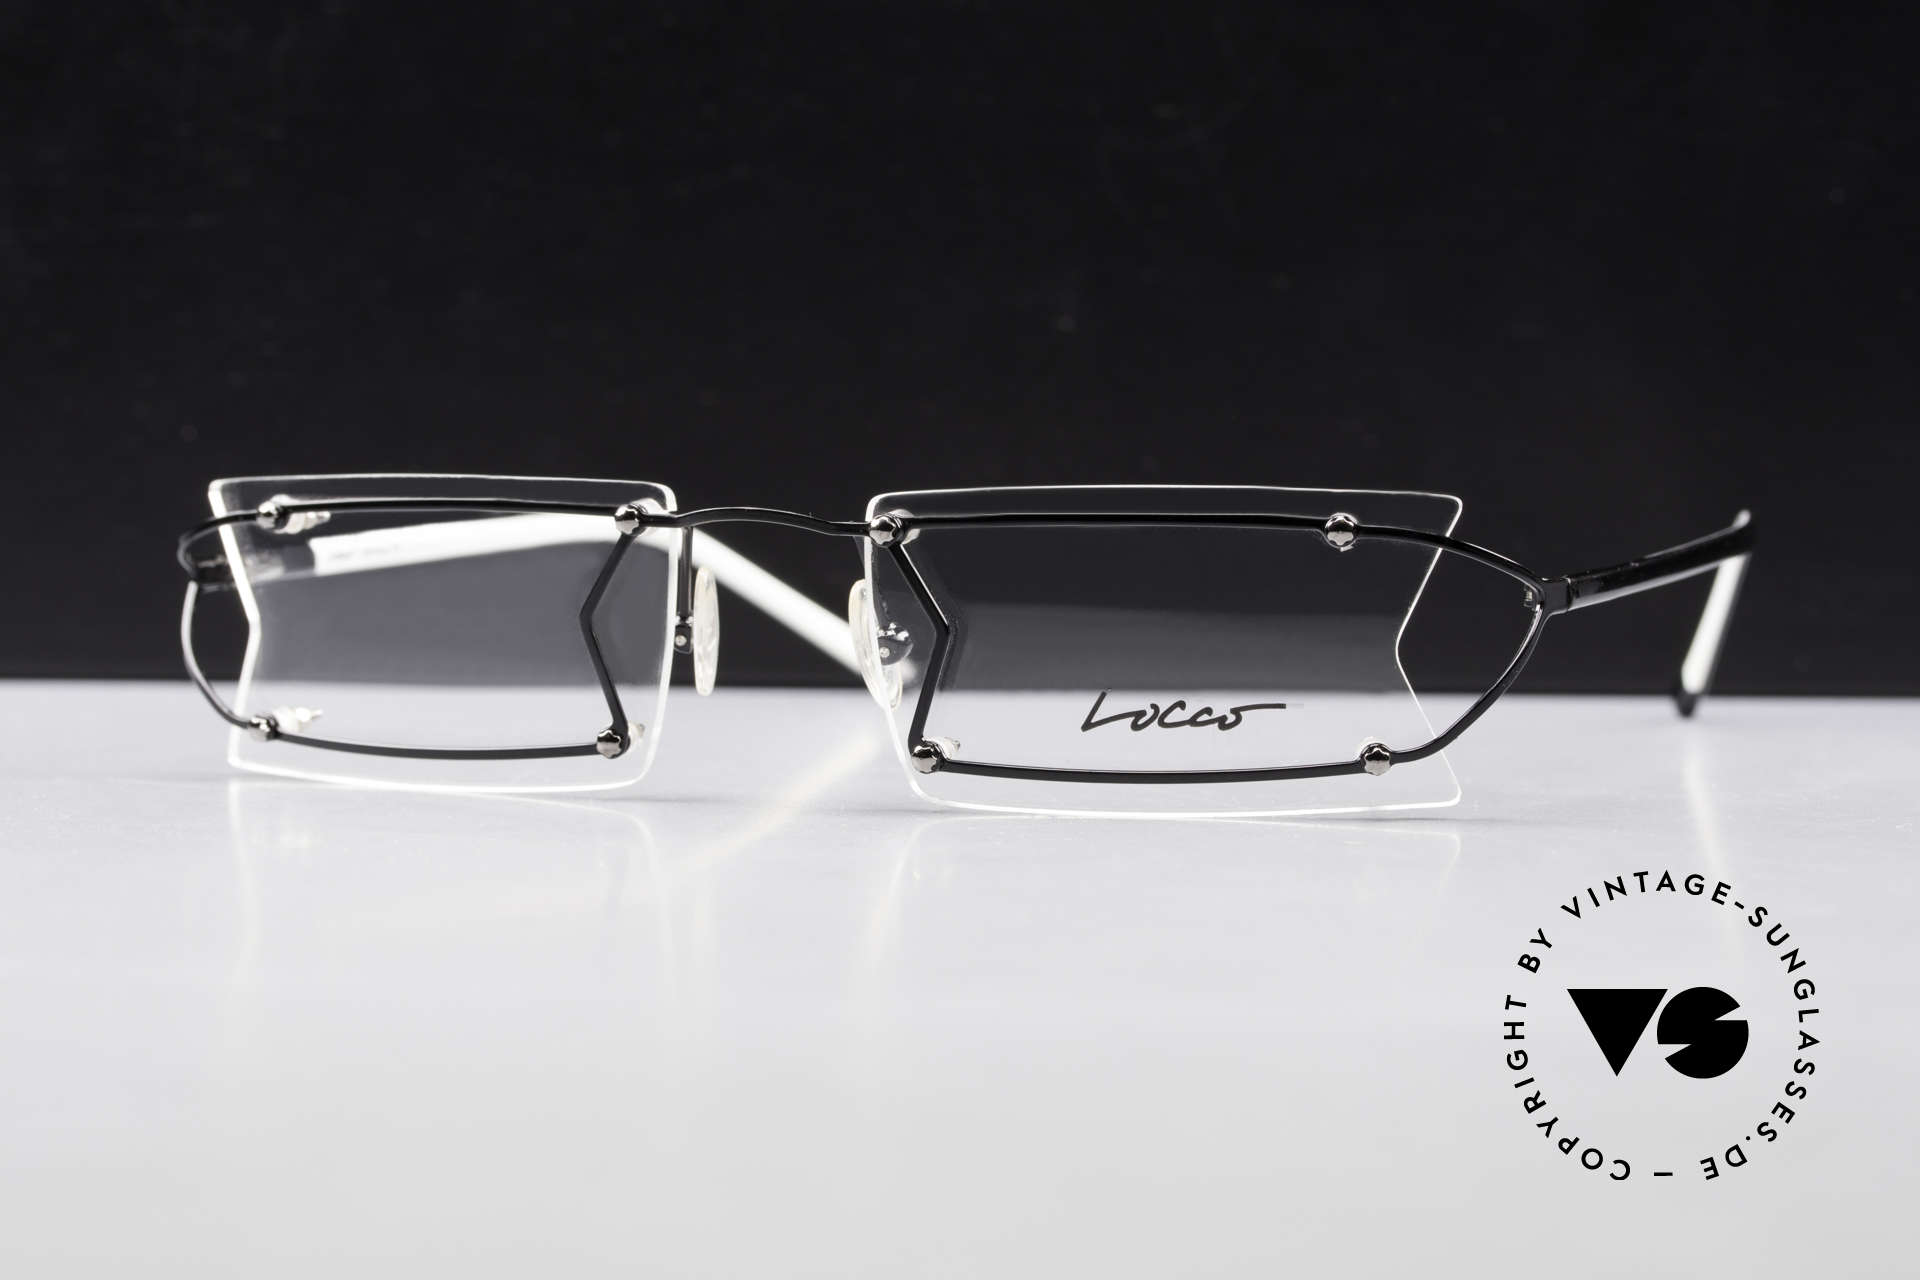 Locco Pinot Crazy 90's Rimless Eyeglasses, never worn vintage rarity for cheerfulness & mirth, Made for Men and Women